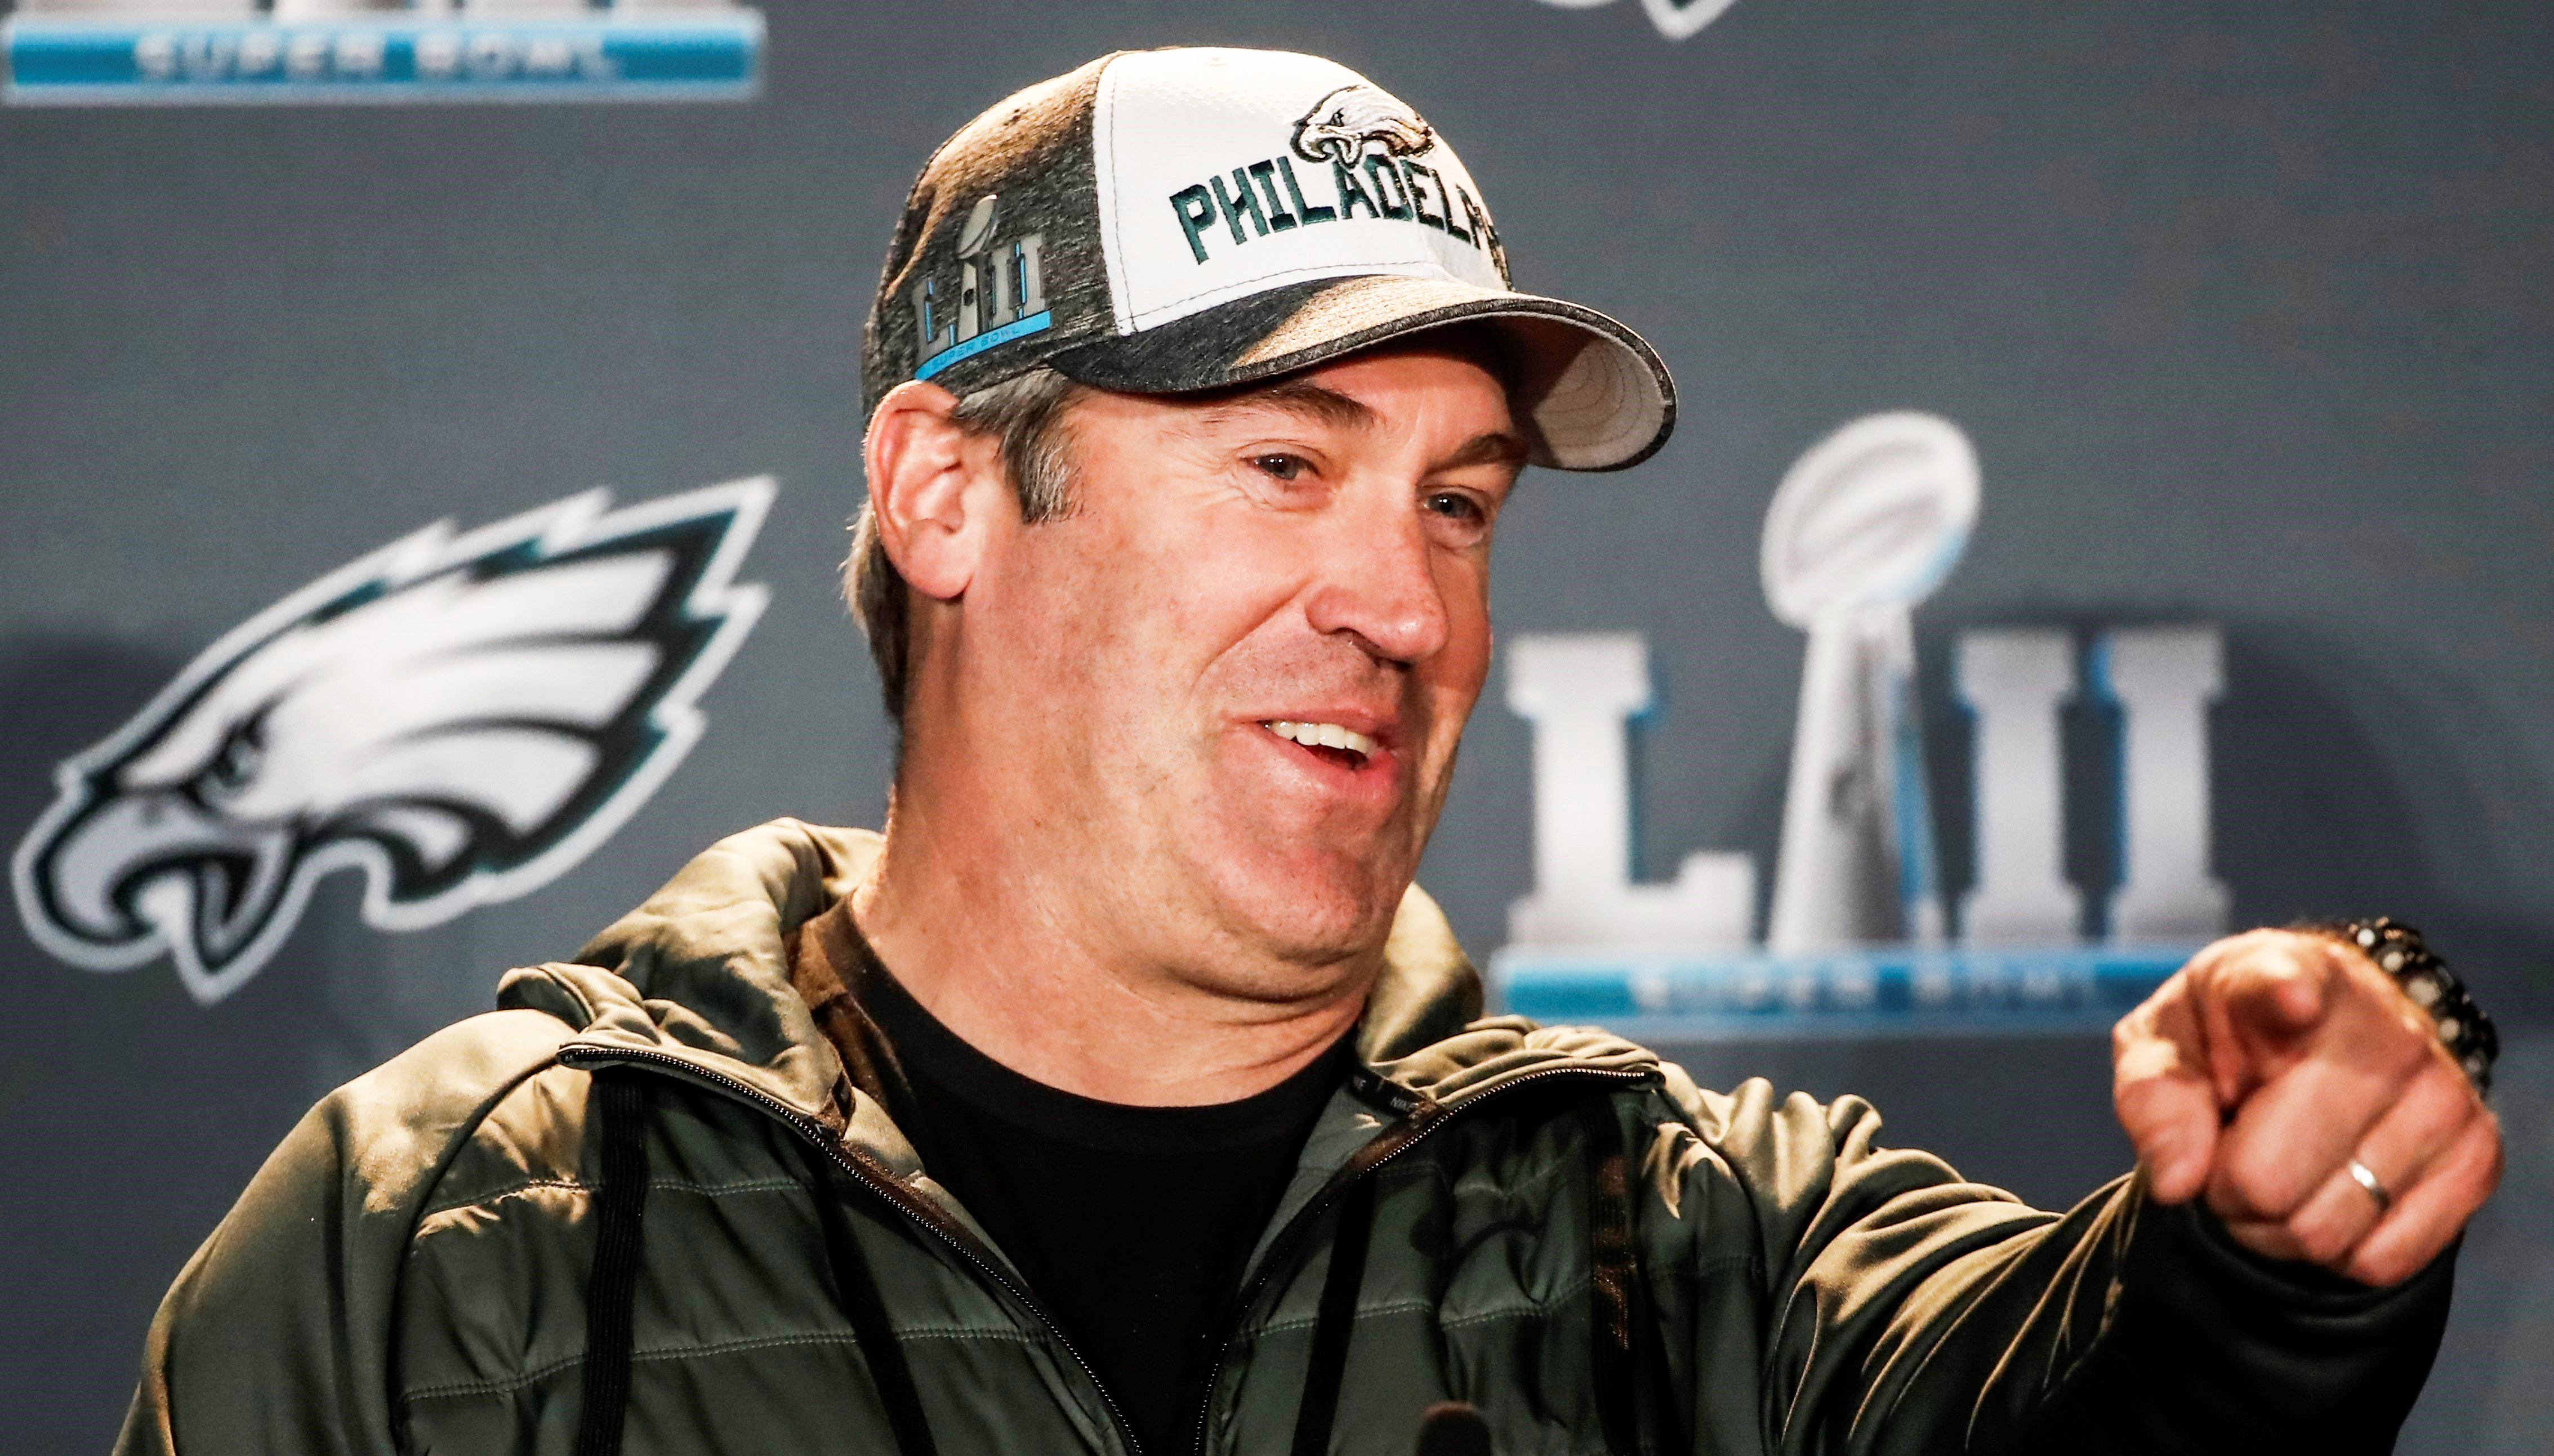 Philadelphia Eagles coach Doug Pederson answers questions from the press. EFE